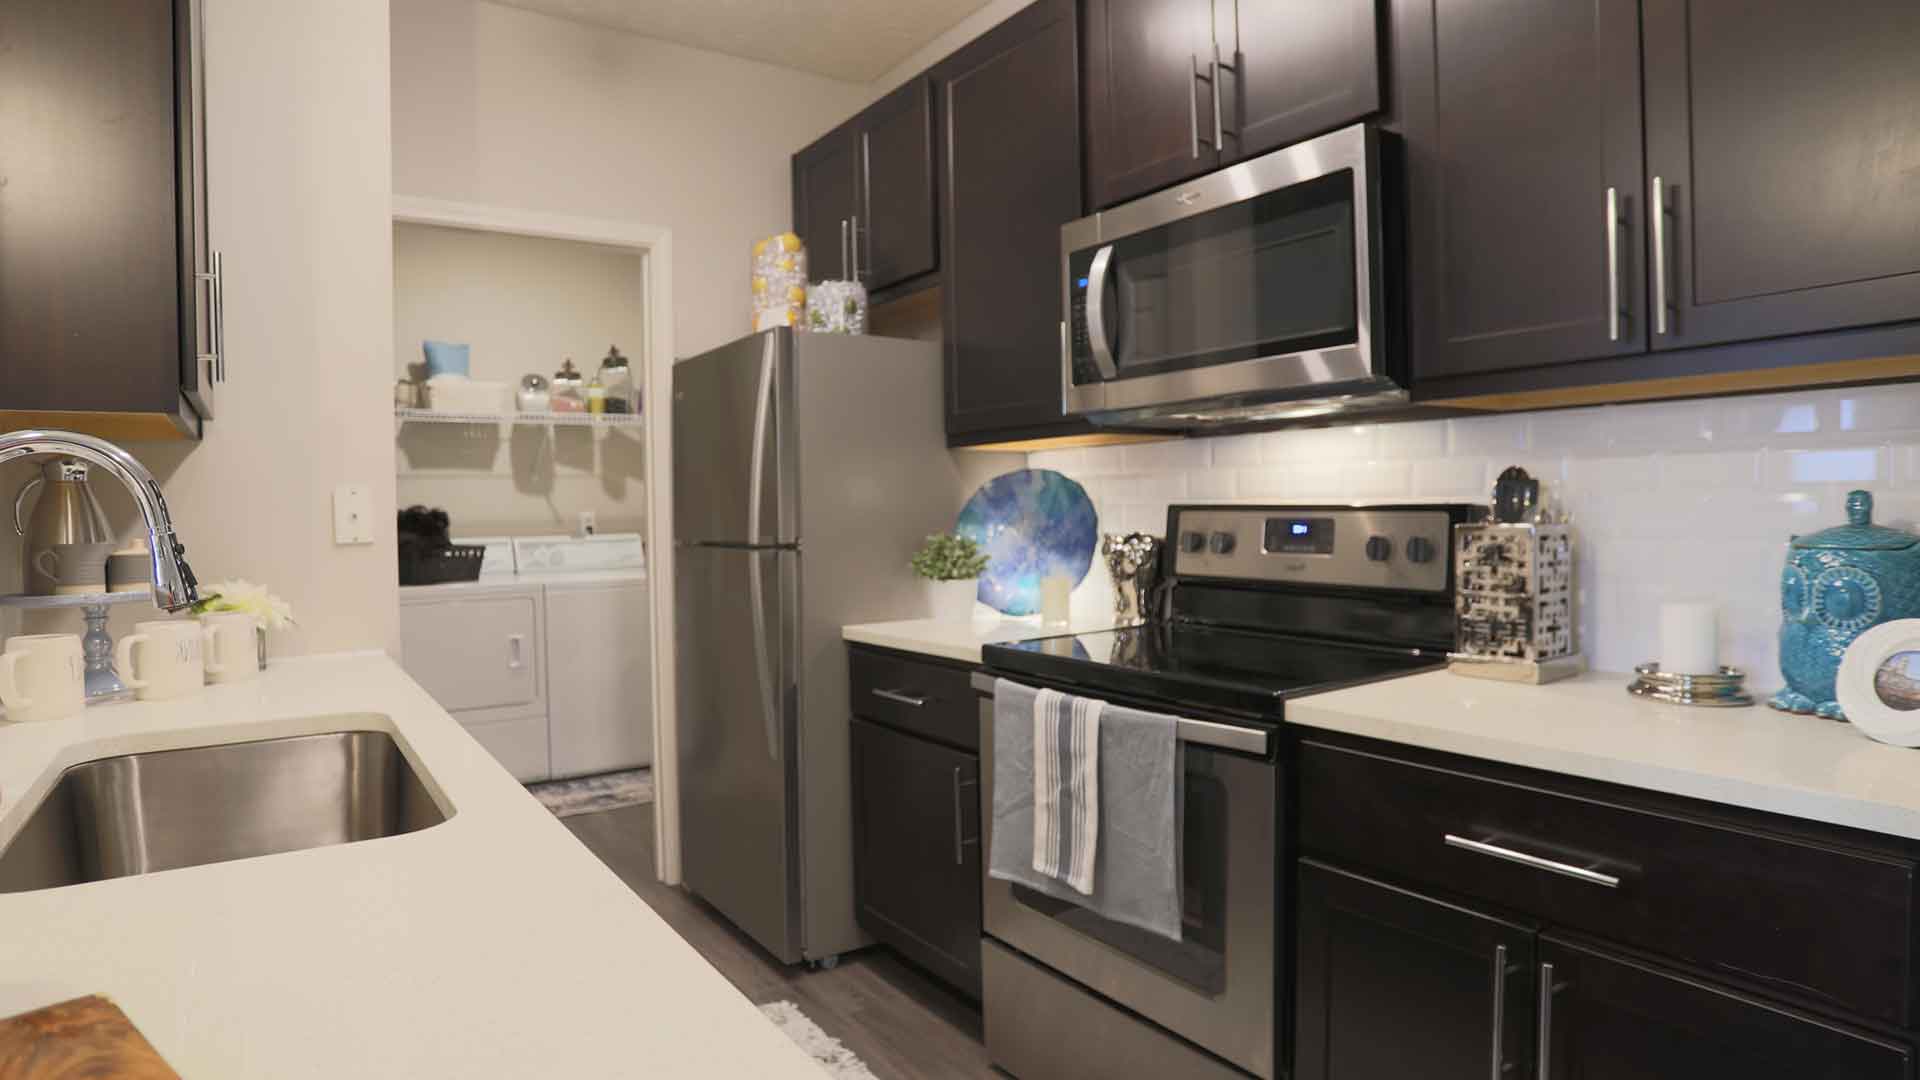 Apartment kitchen with stainless steel appliances and dark wood cabinets.